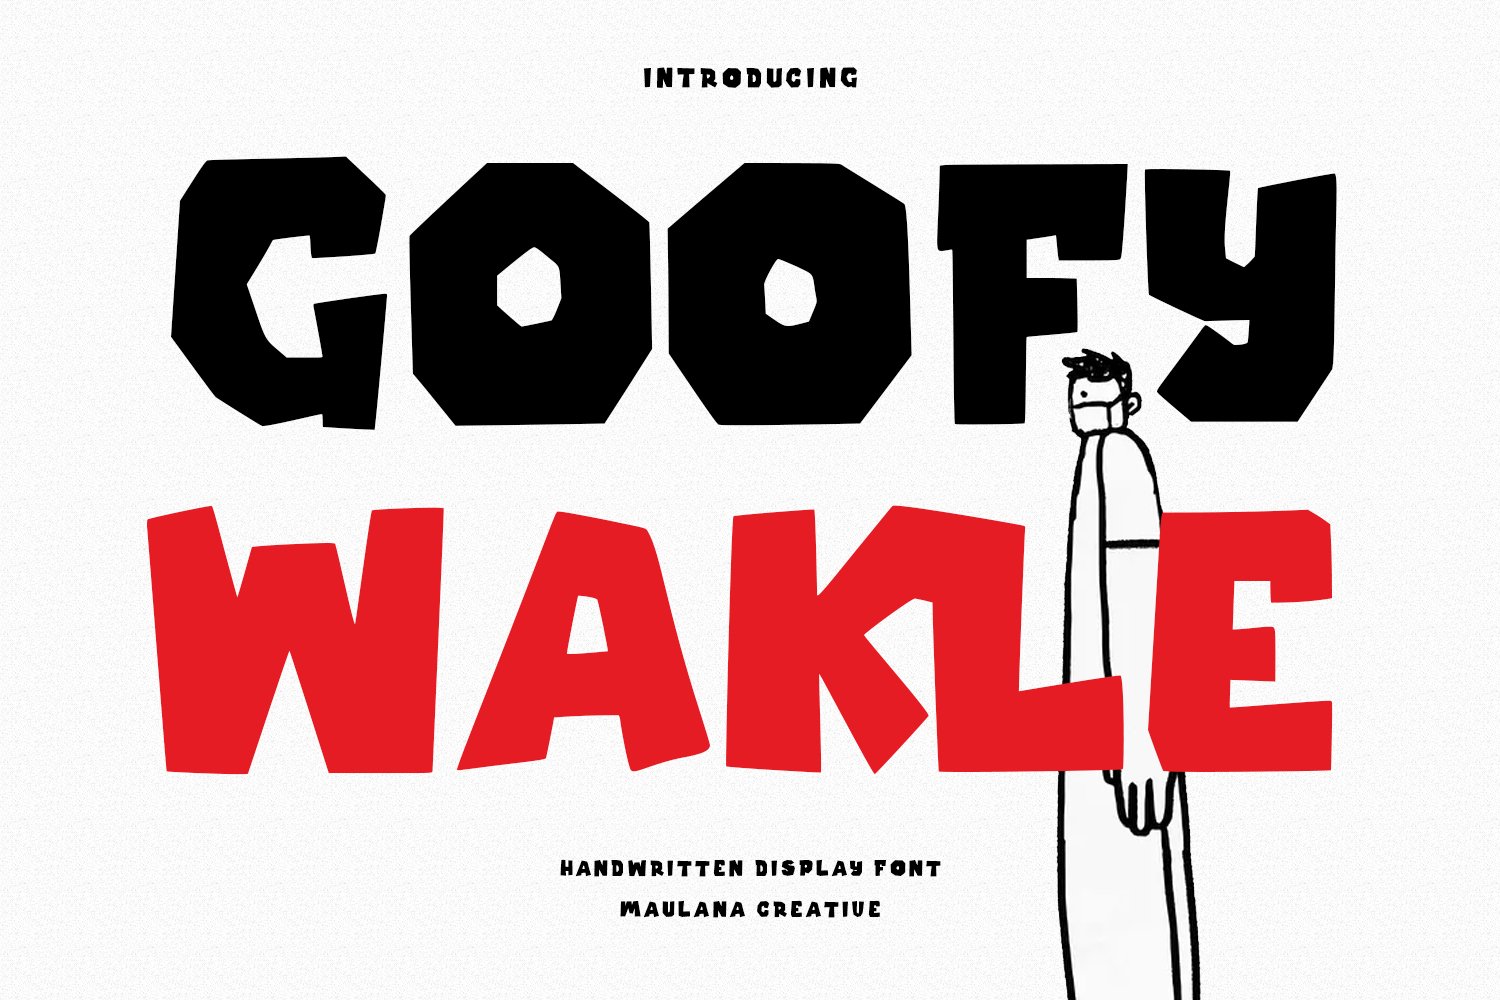 Goffy Wakle Handwritten Display Font cover image.